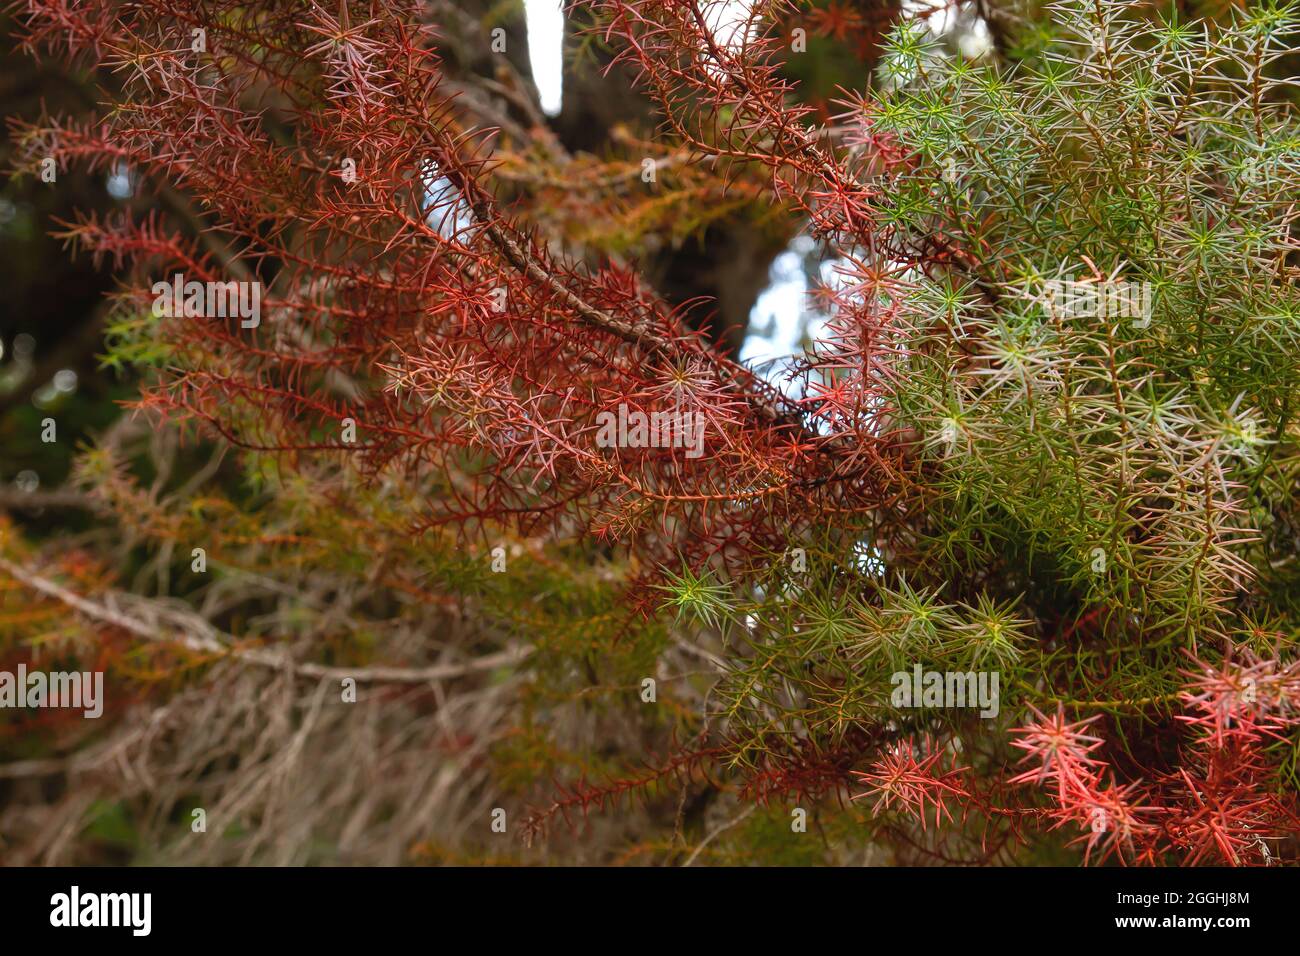 Cryptomeria japonica Japanese cedar evergreen tree red and green foliage detail Stock Photo